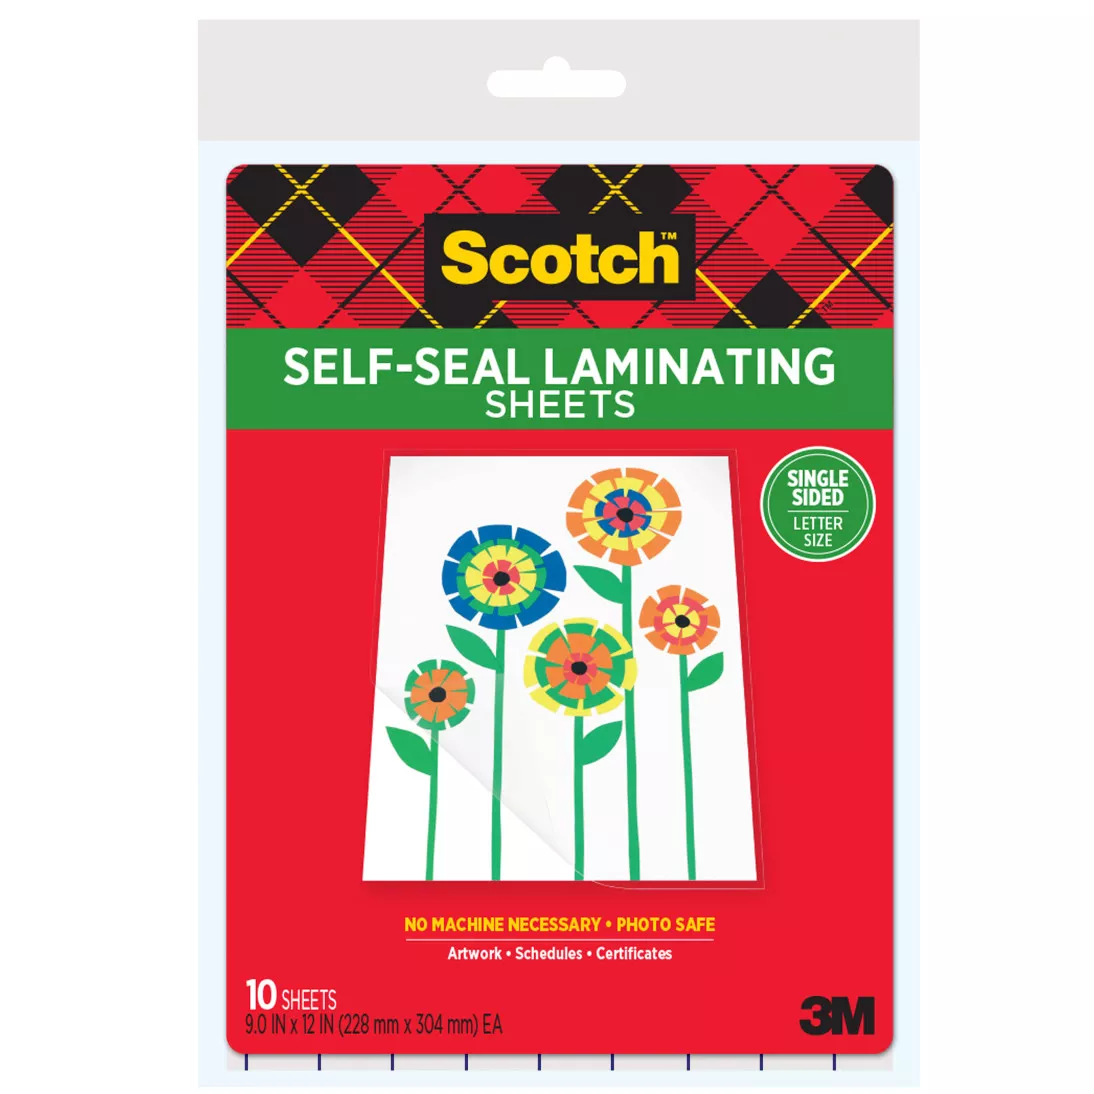 Scotch™ Single-Sided Laminating Sheets LS854SS-10, 9 in x 12 in Letter
Size Single Sided